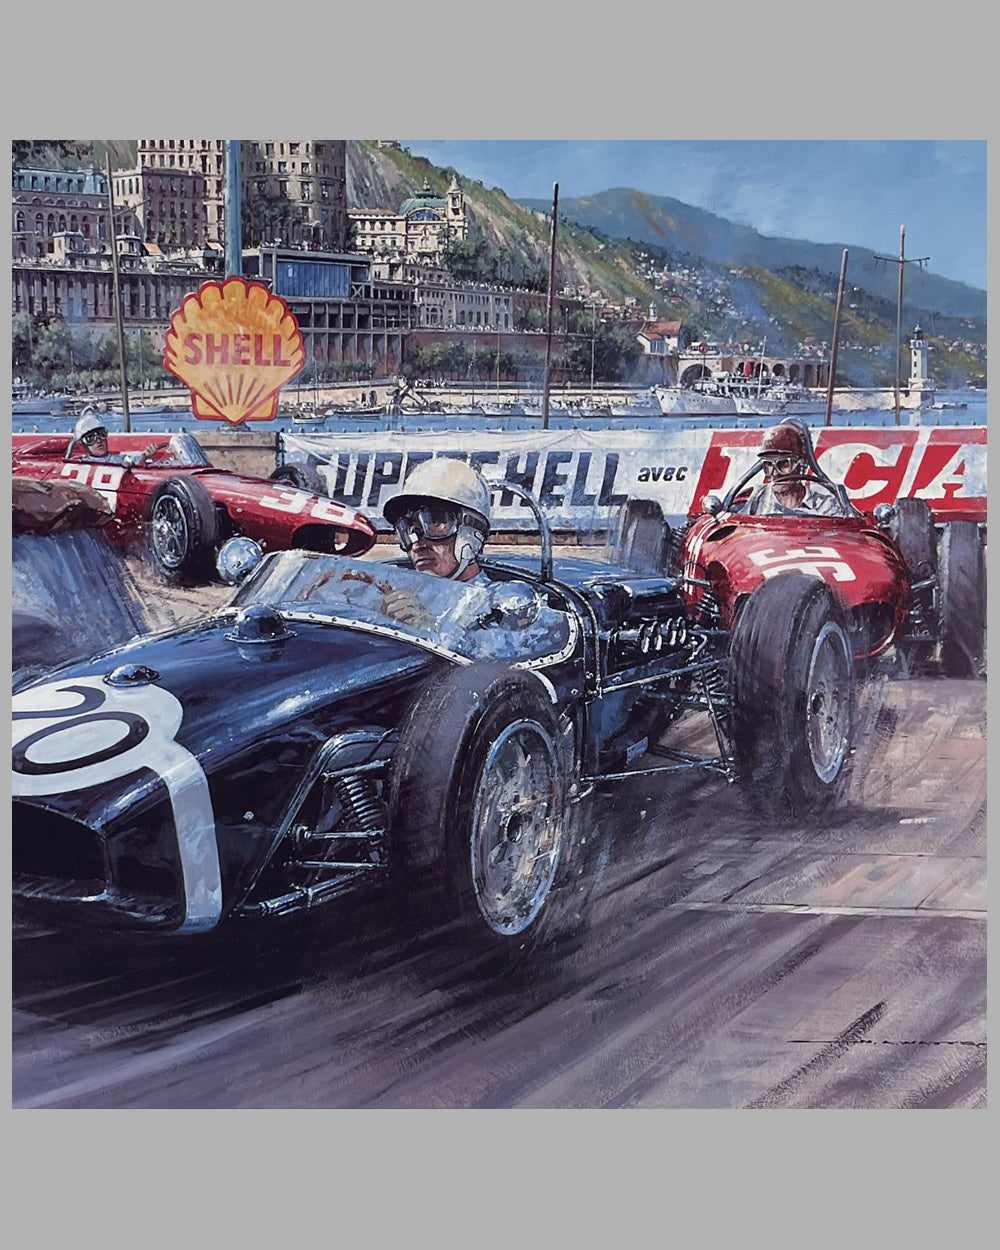 Monaco Grand Prix 1961 print by Nicholas Watts, autographed by Hill, Moss and Walker 2